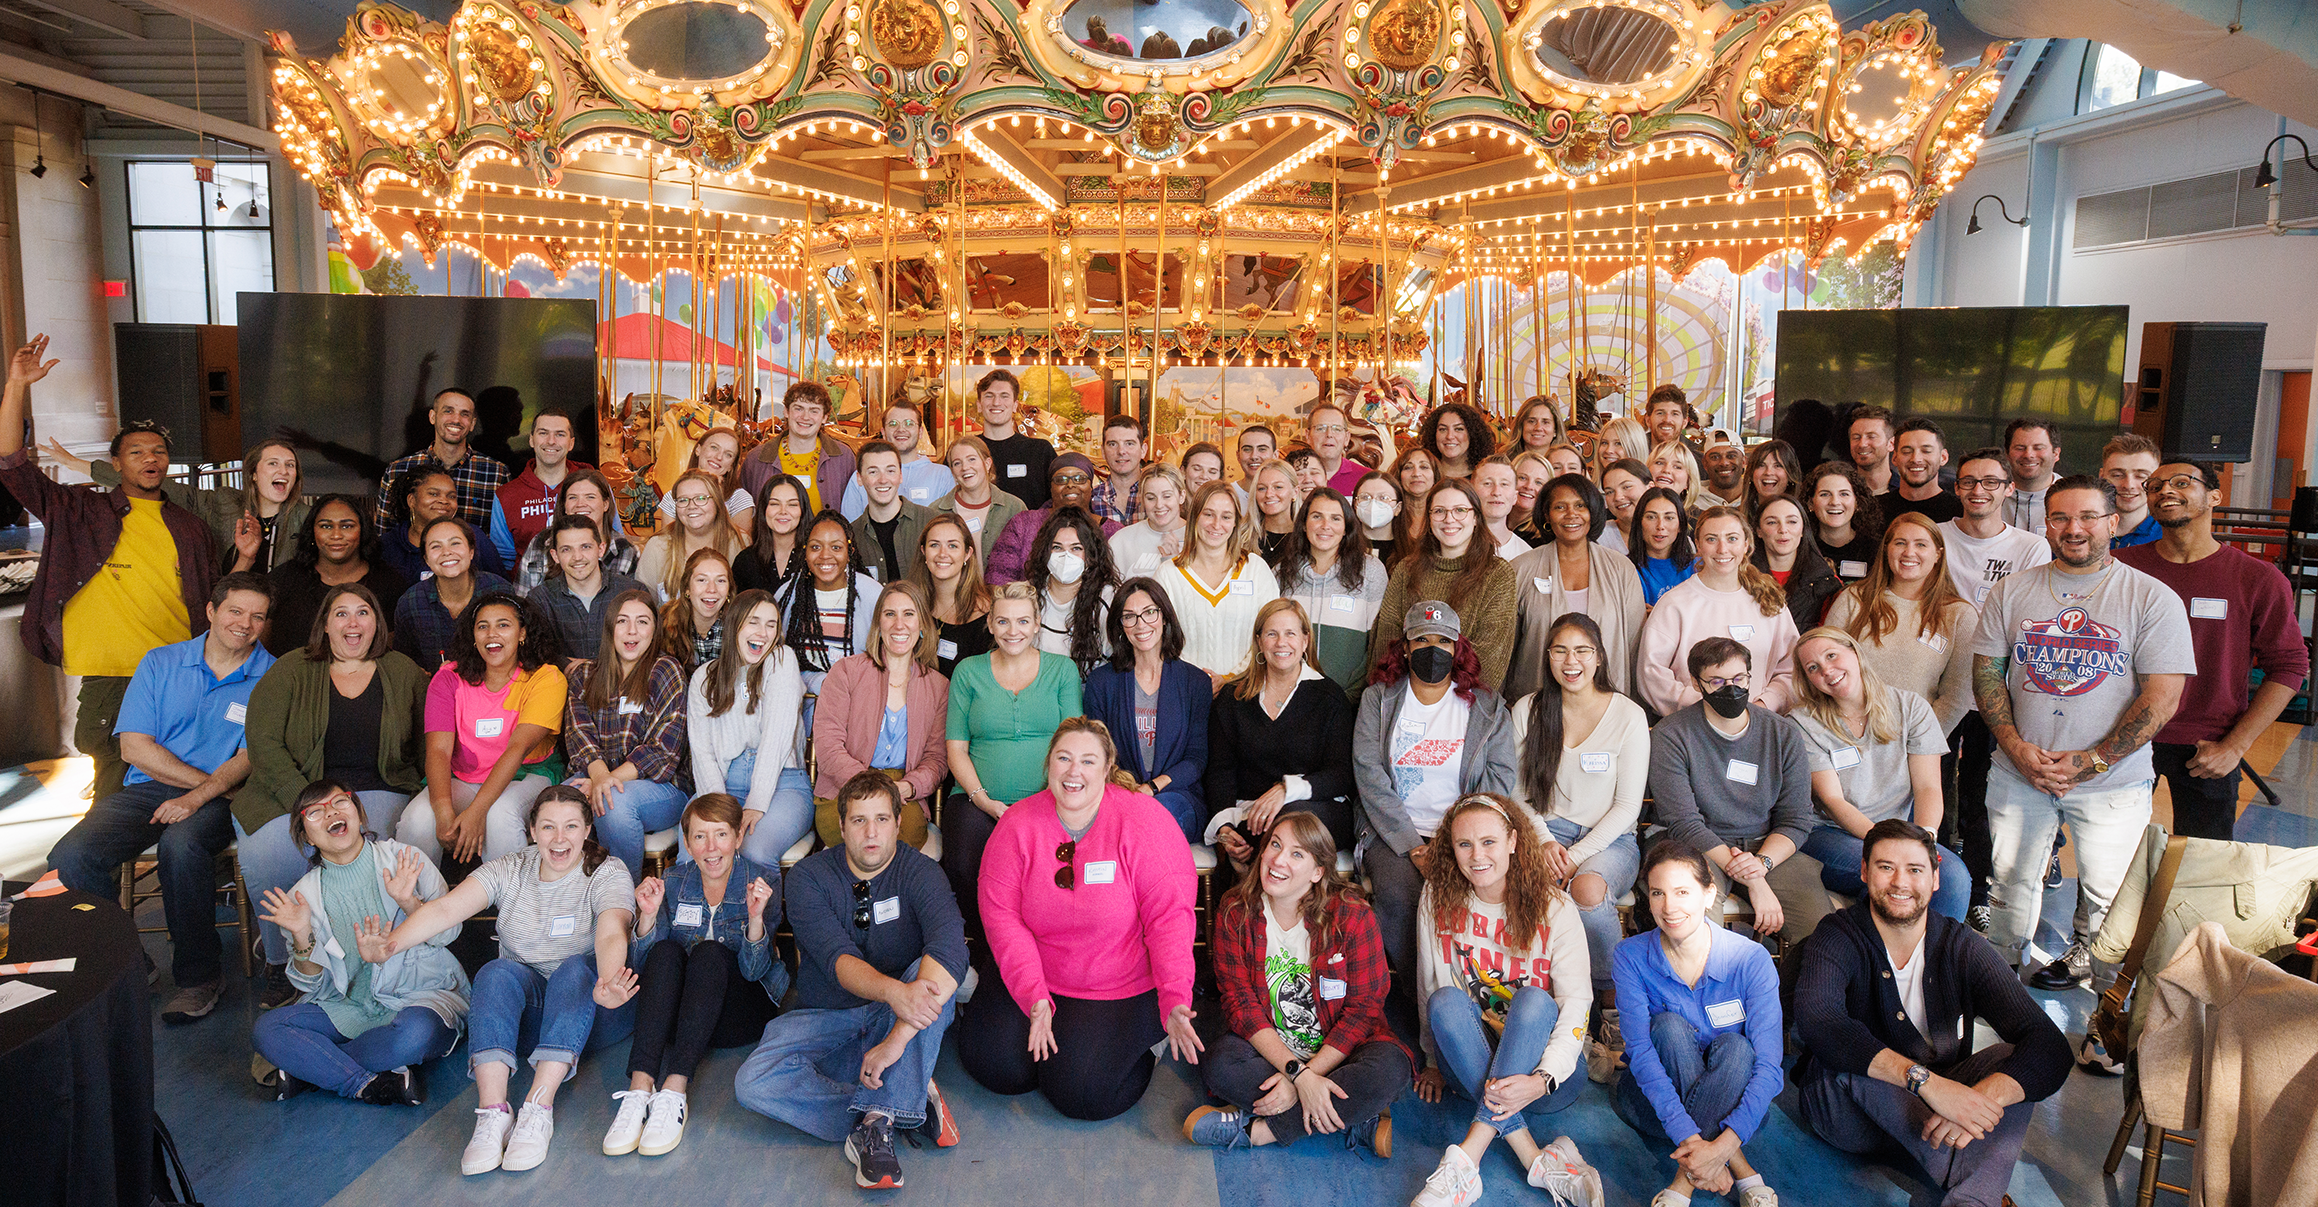 100+ smiling Tierney Employees at the Please Touch Museum retreat